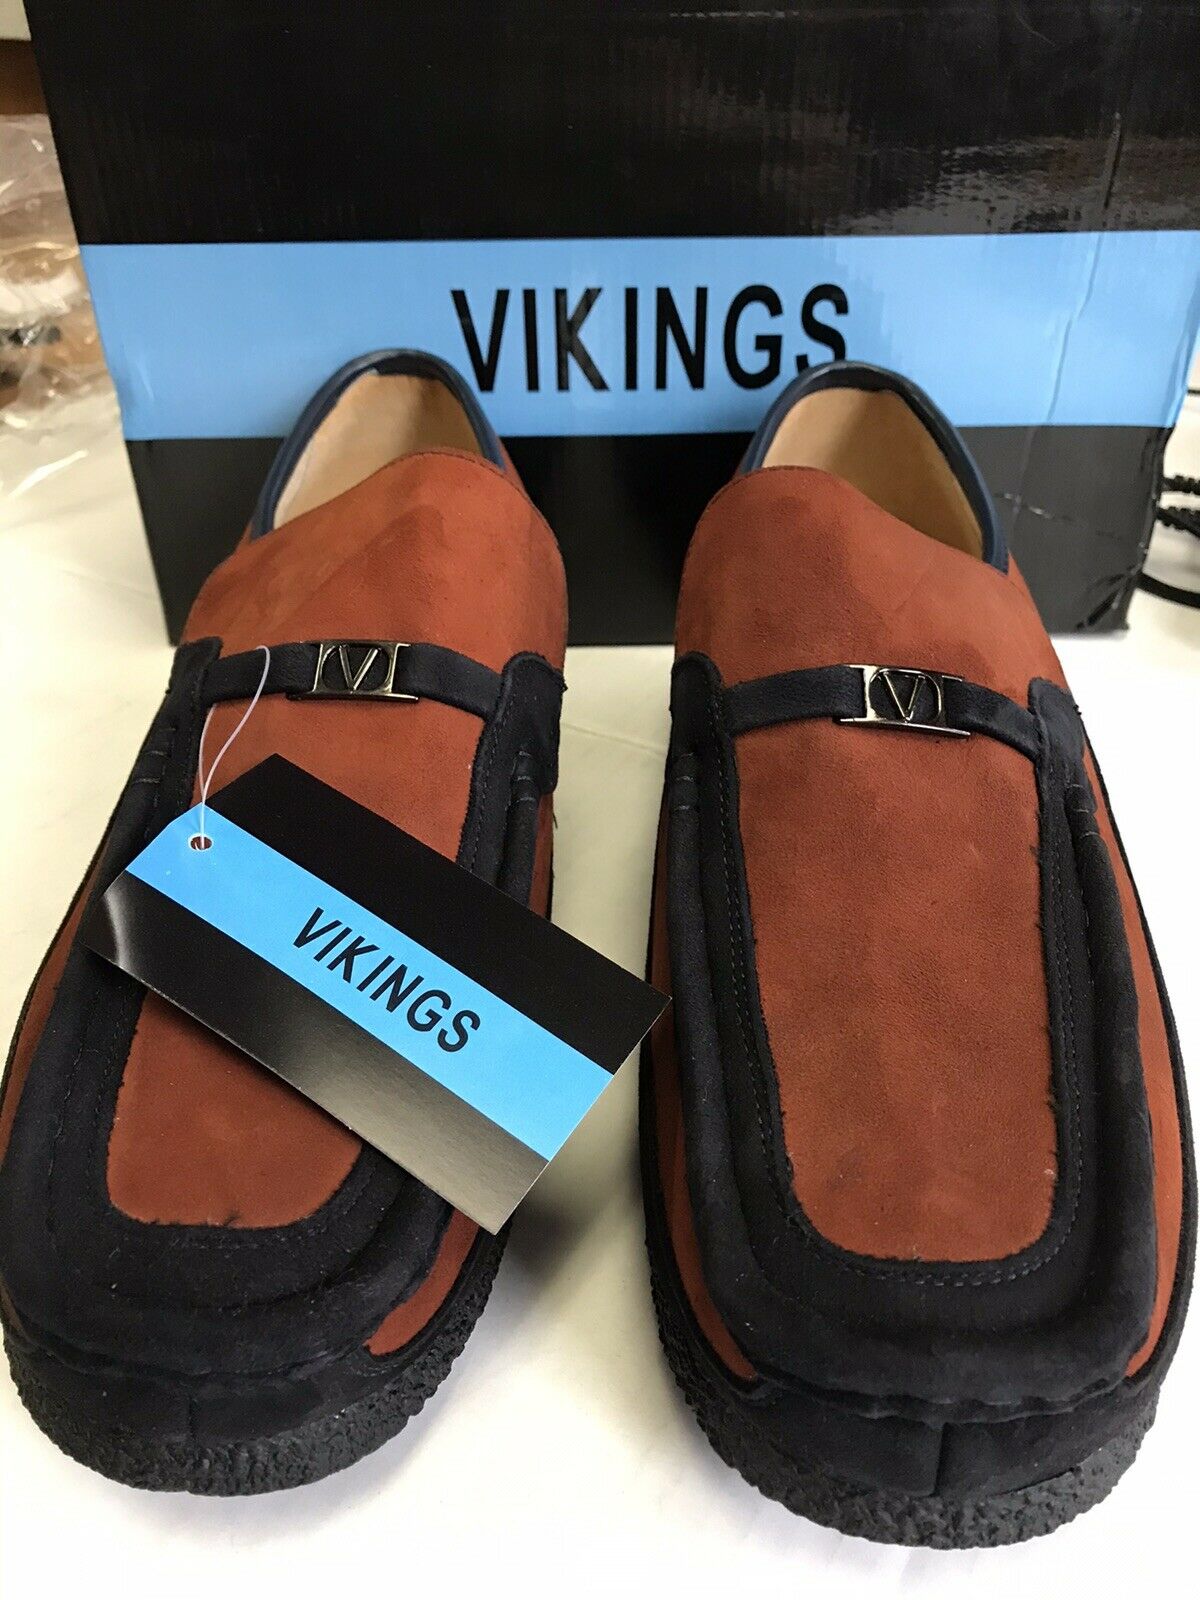 Viking Comfort Suede/Leather Men Shoes Size 12